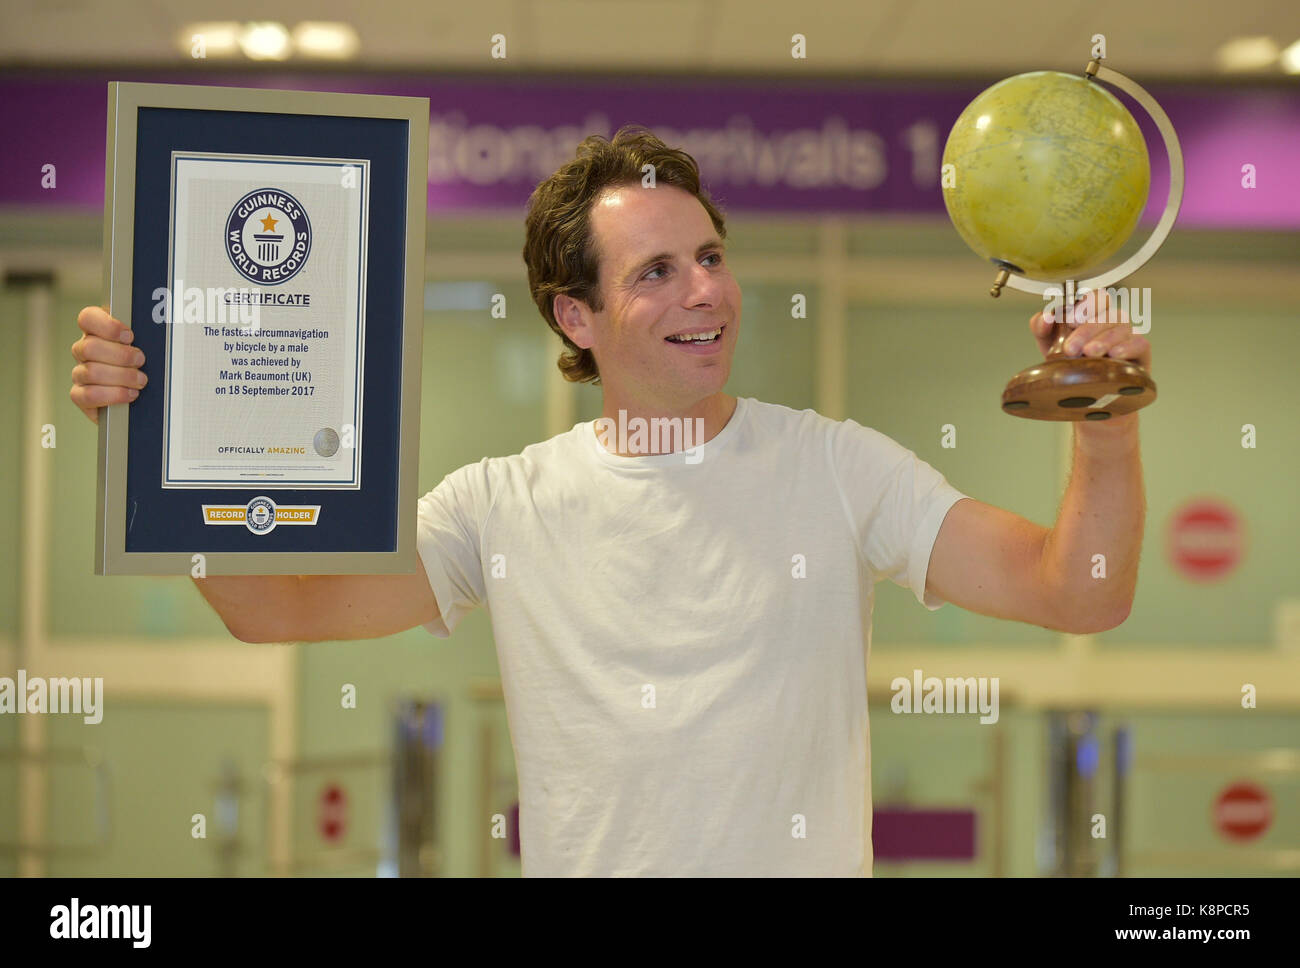 Adventurer Mark Beaumont who set a new world record for cycling around the world in 80 Days. Stock Photo